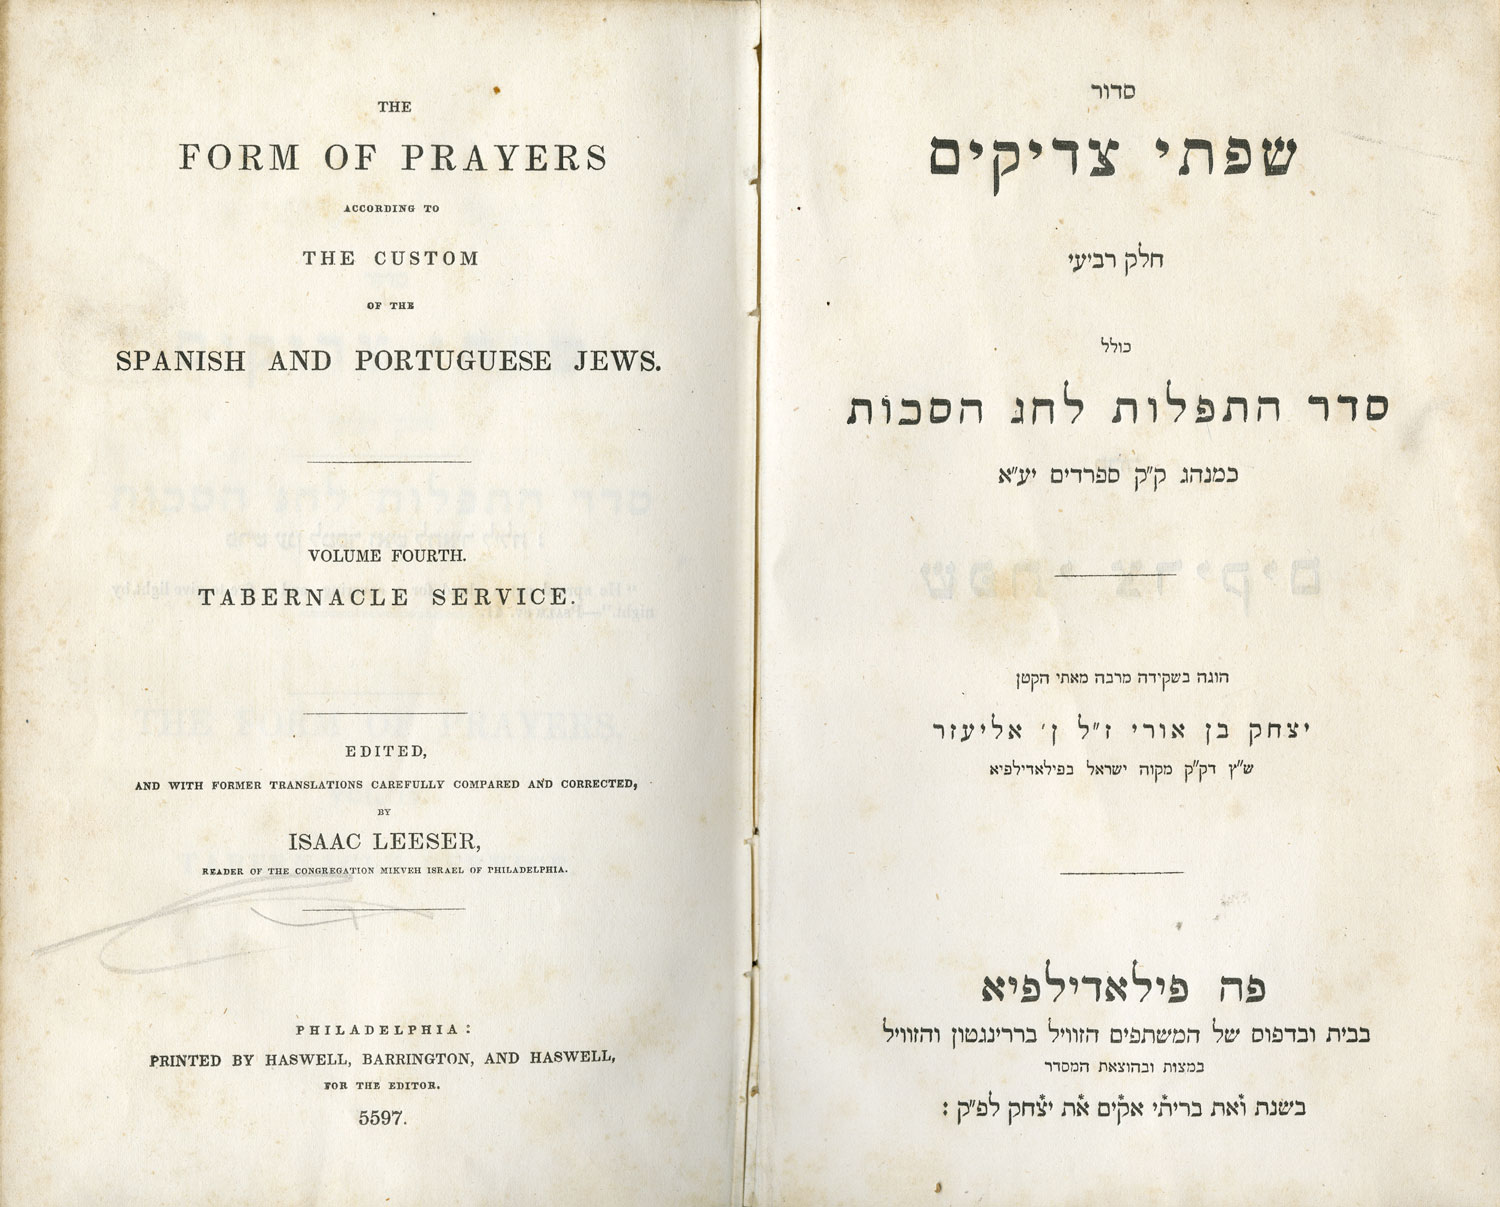 Prayer book, title pages in English and Hebrew